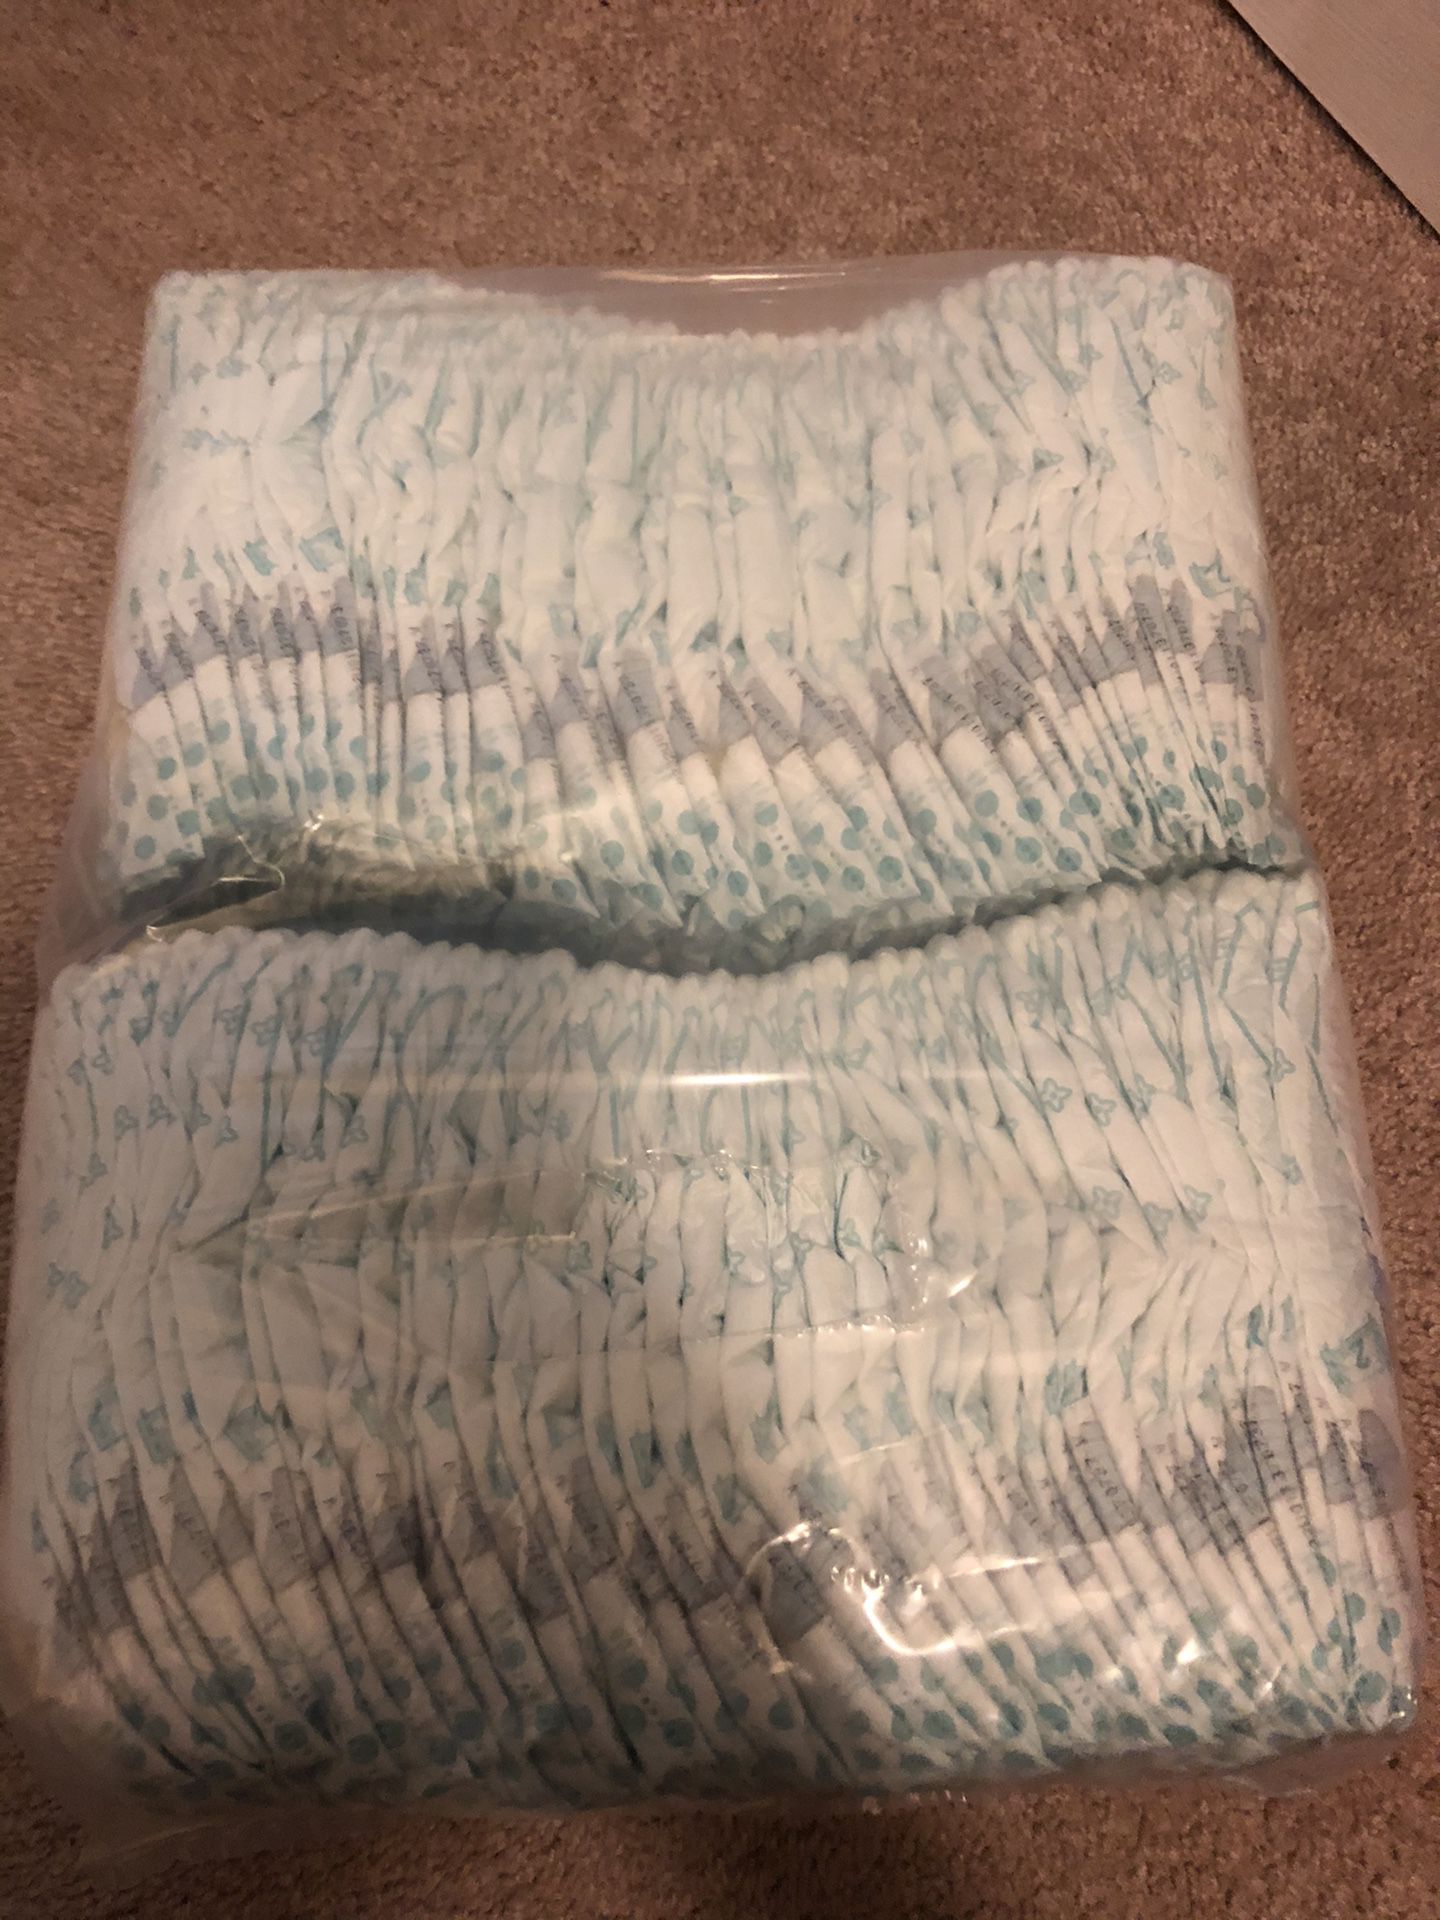 78 brand new Pampers size 2 $17 or better offer